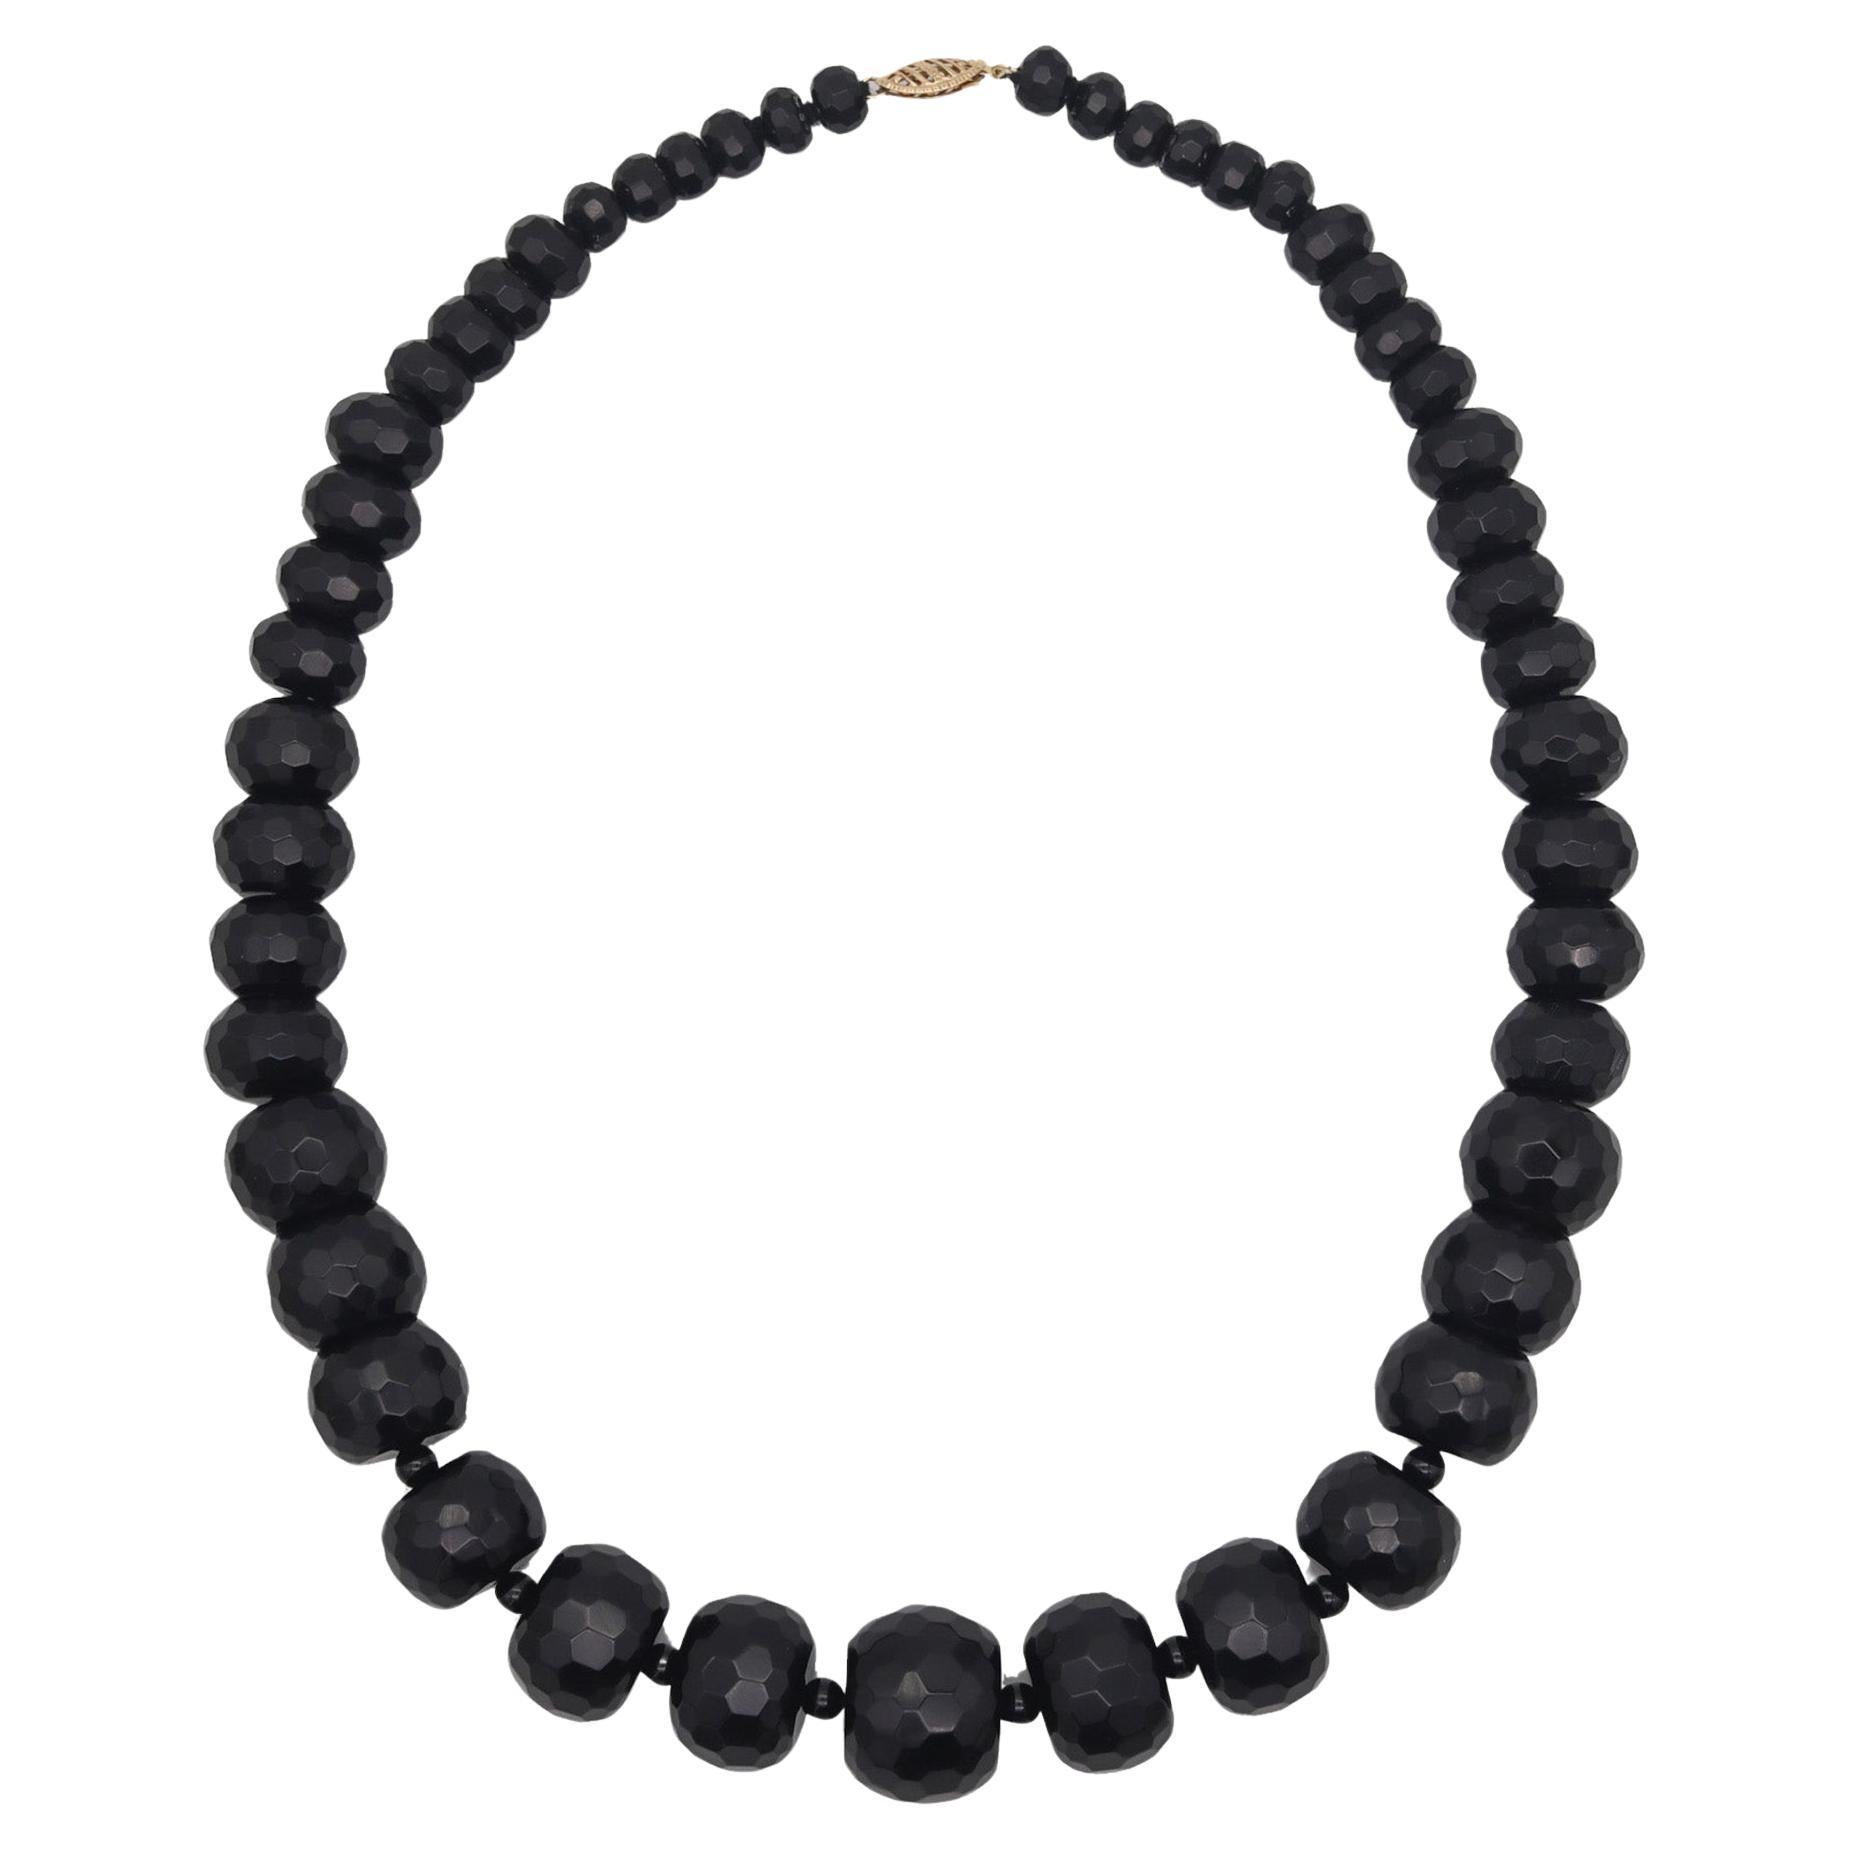 Modernist 1970 Necklace With Graduated Faceted Beads Of Onyx In 14Kt Yellow Gold